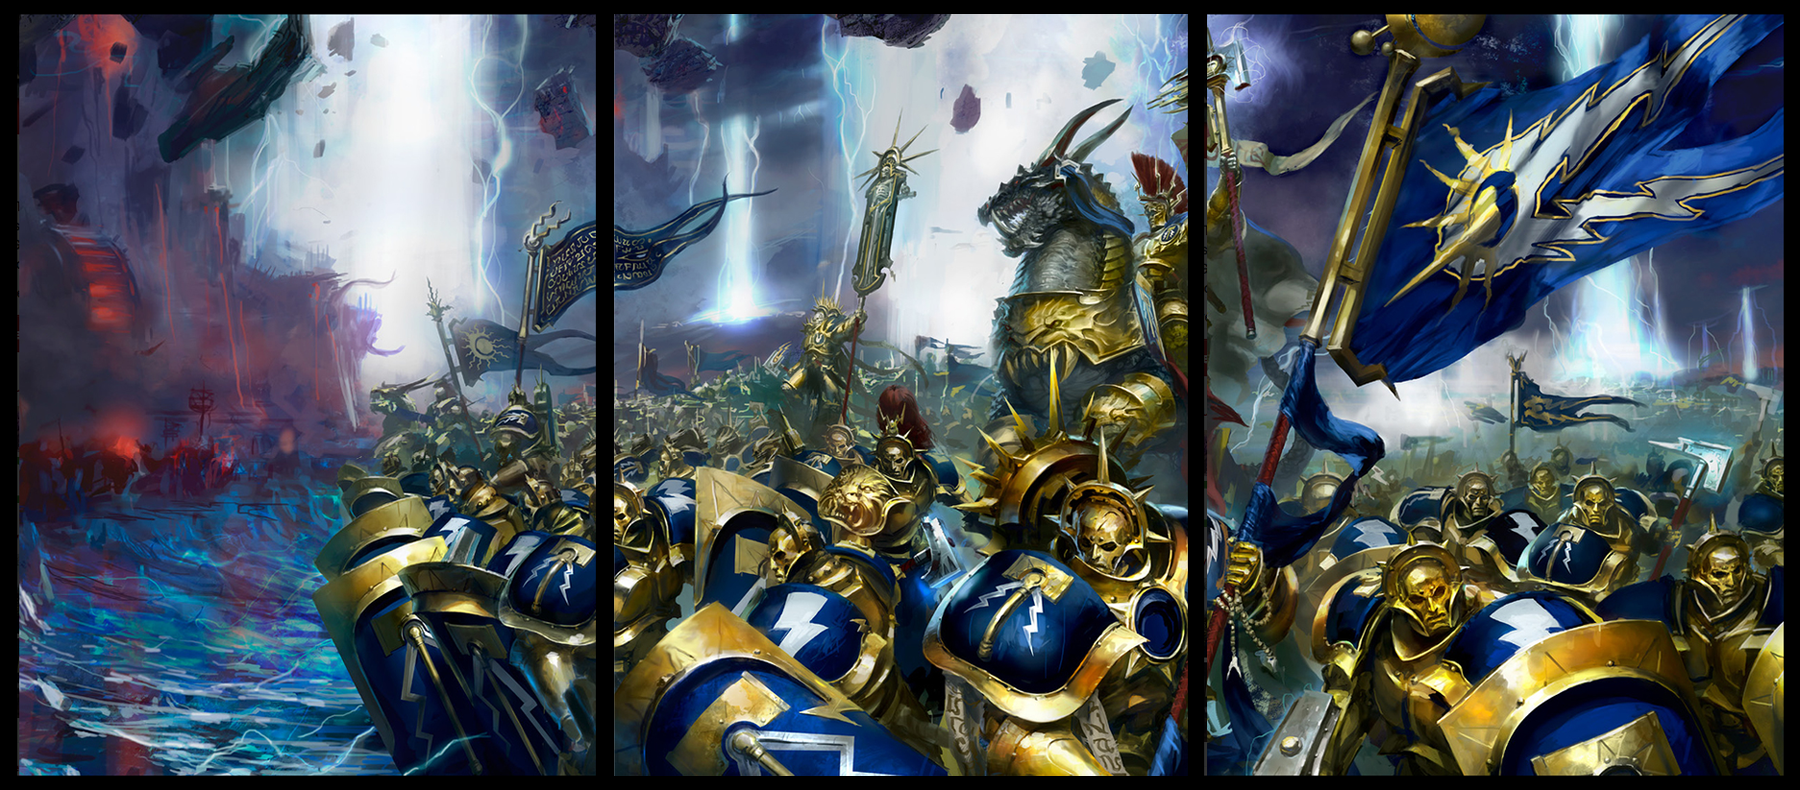 age of sigmar wallpaper,strategy video game,cg artwork,games,knight,mythology